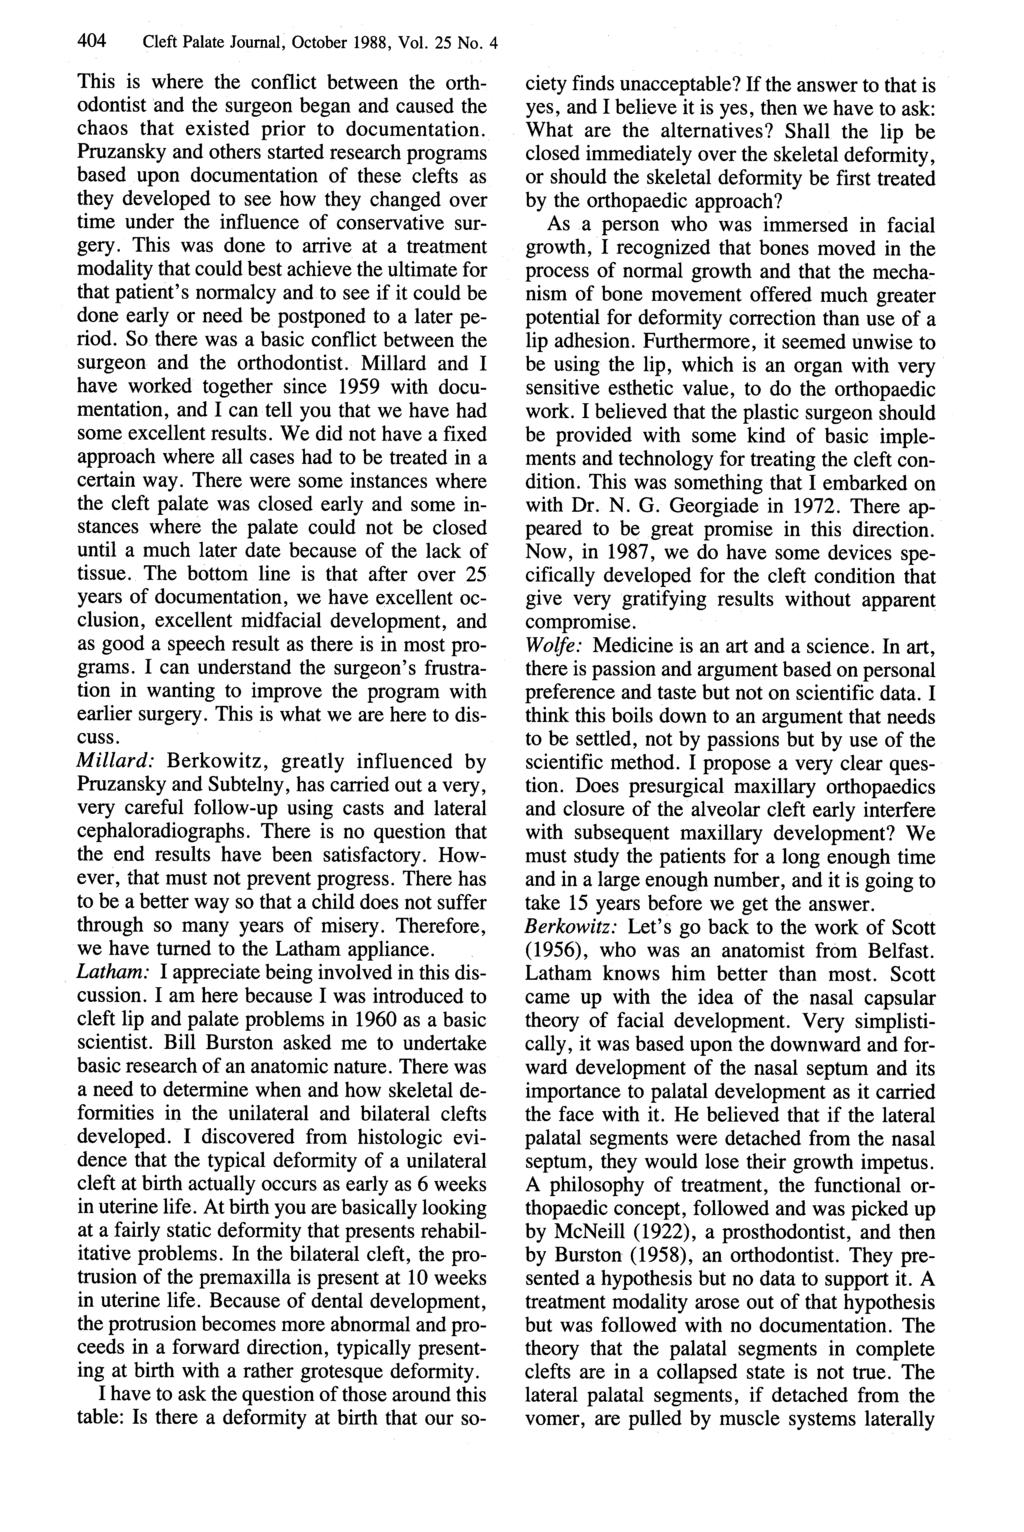 _ 404 Cleft Palate Journal, October 1988, Vol. 25 No. 4 This is where the conflict between the orthodontist and the surgeon began and caused the chaos that existed prior to documentation.